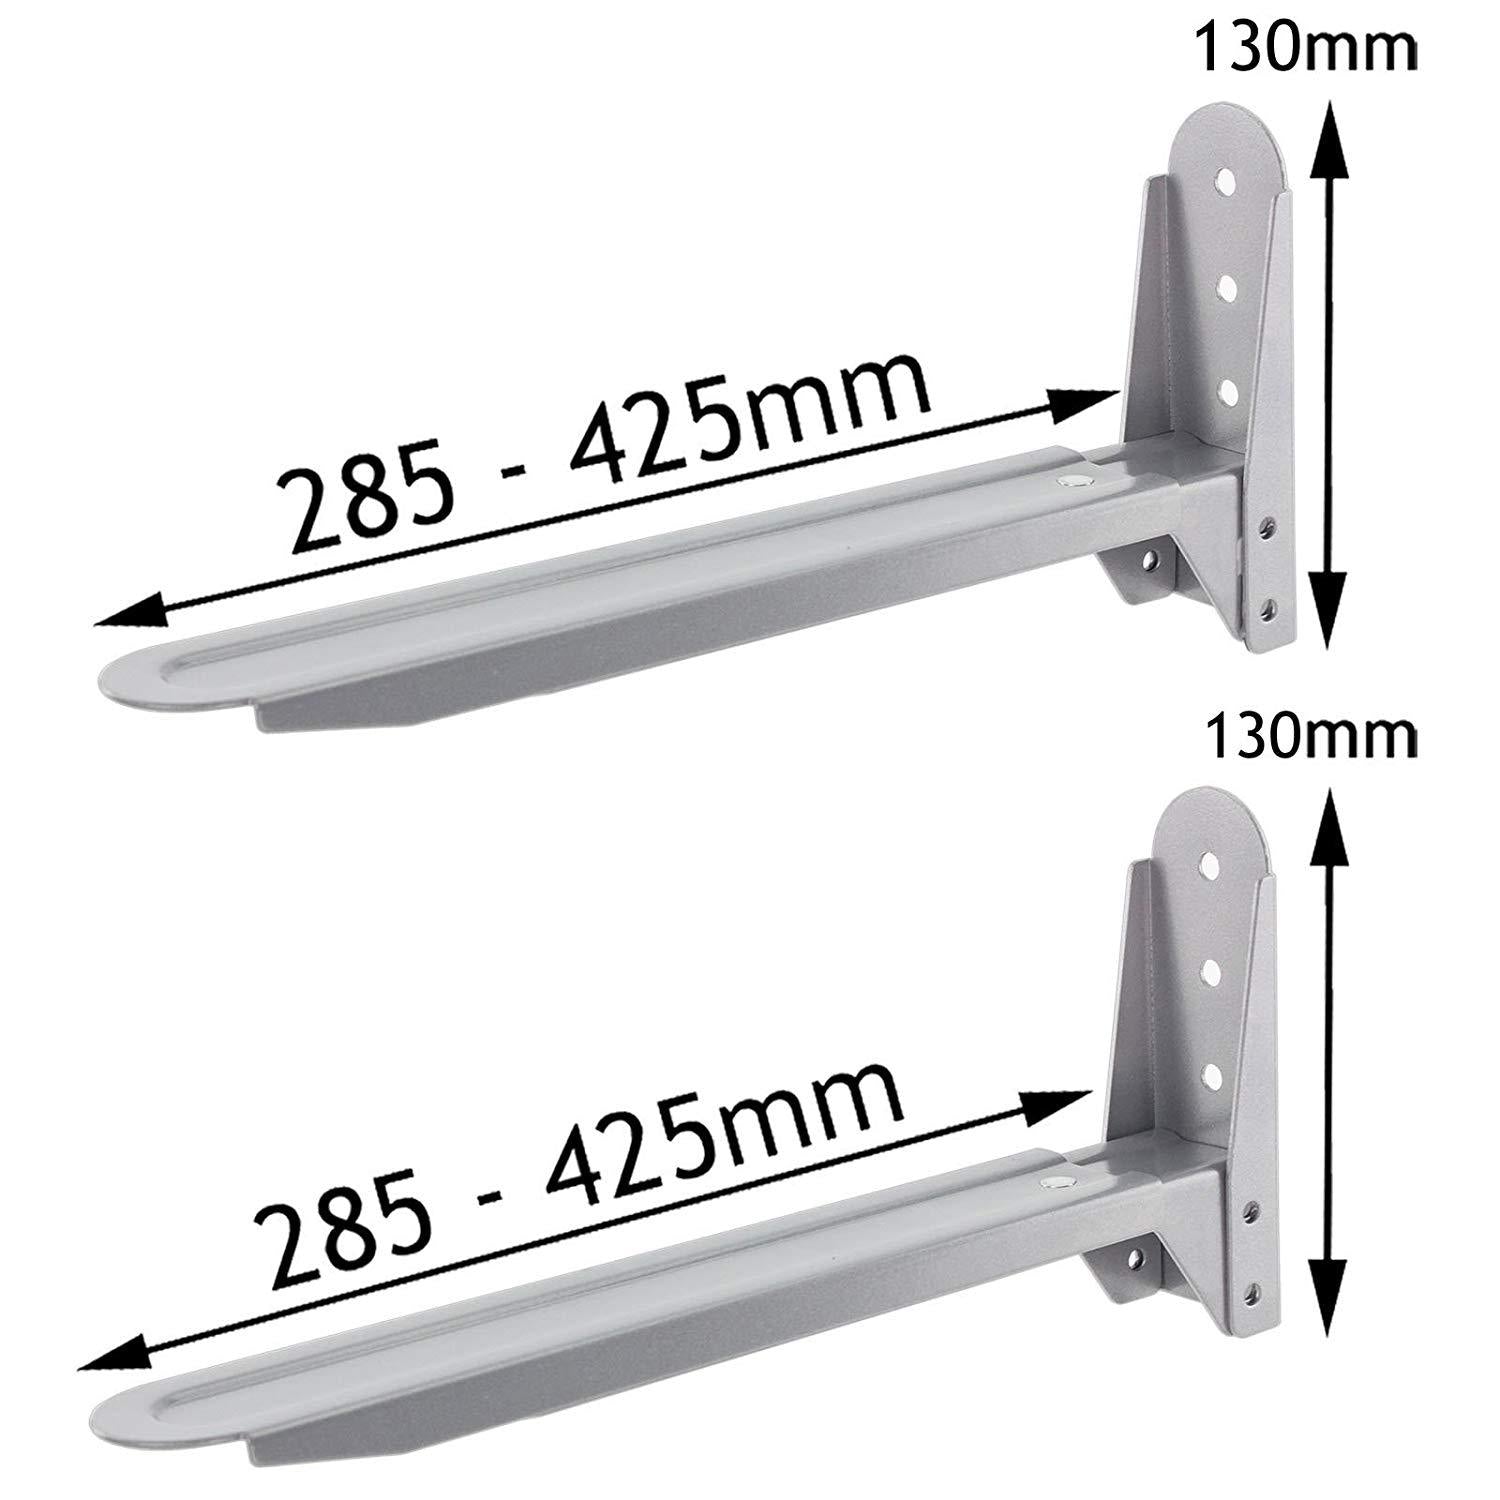 Silver Wall Mount Brackets for Daewoo Microwave x 2